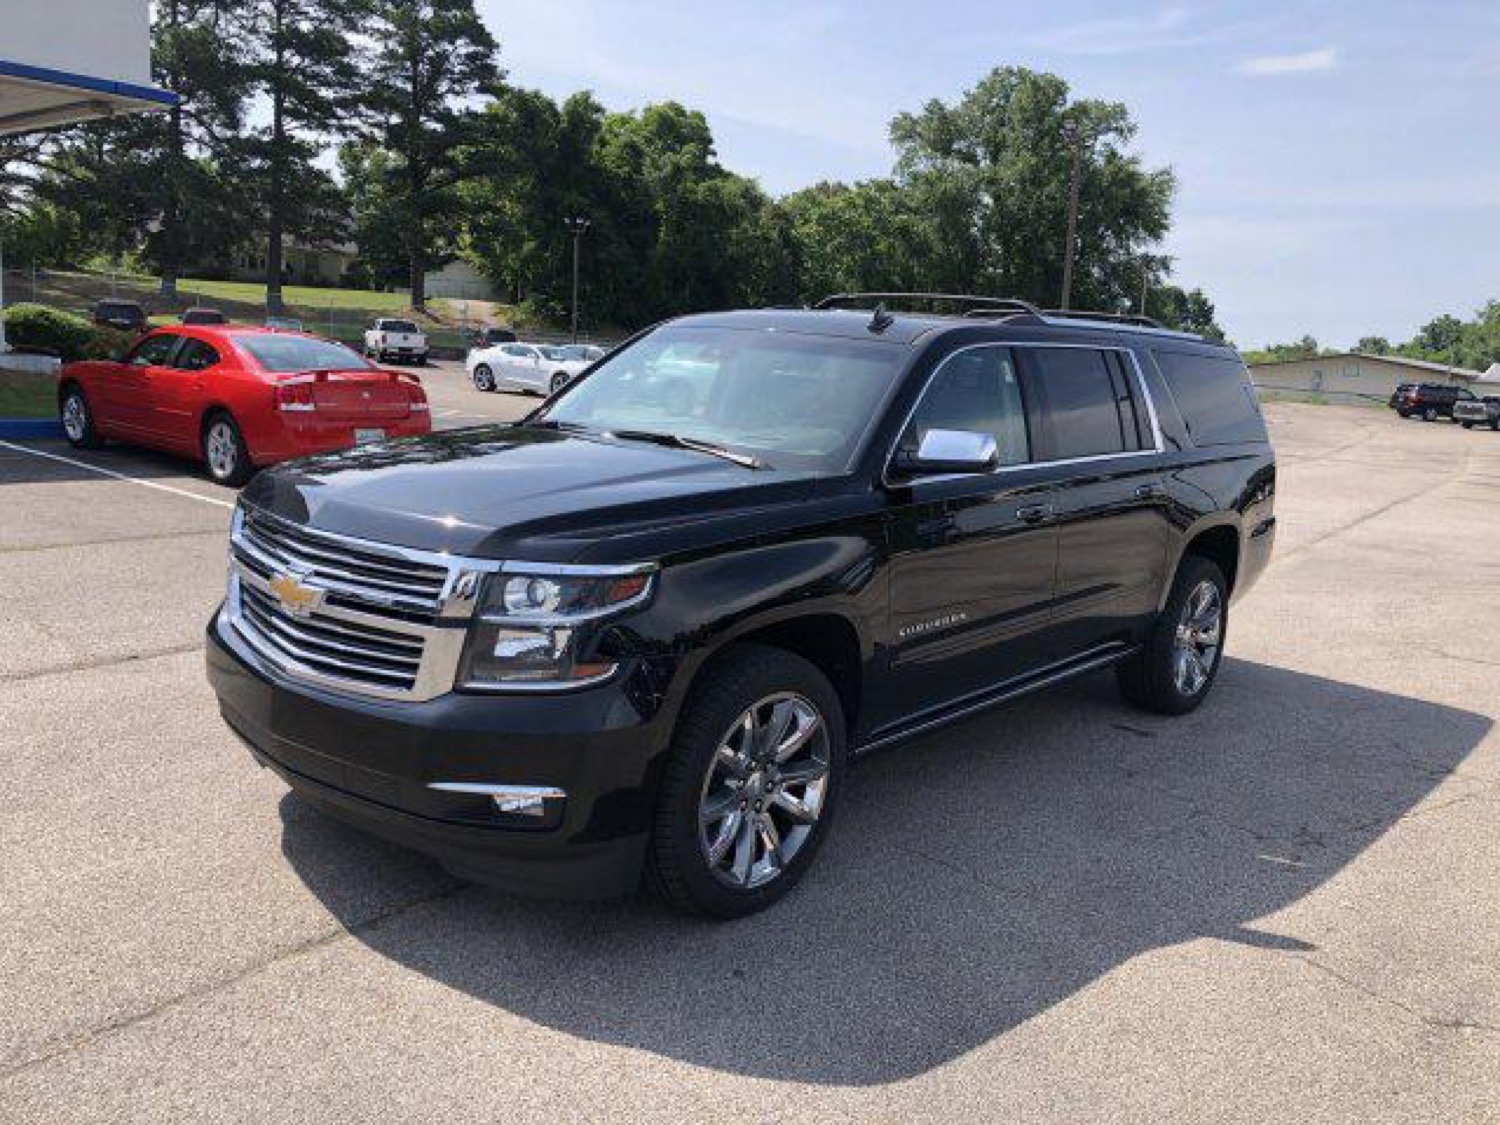 New 2017 Chevrolet Suburban Premier For Sale In Tennessee Gm Authority